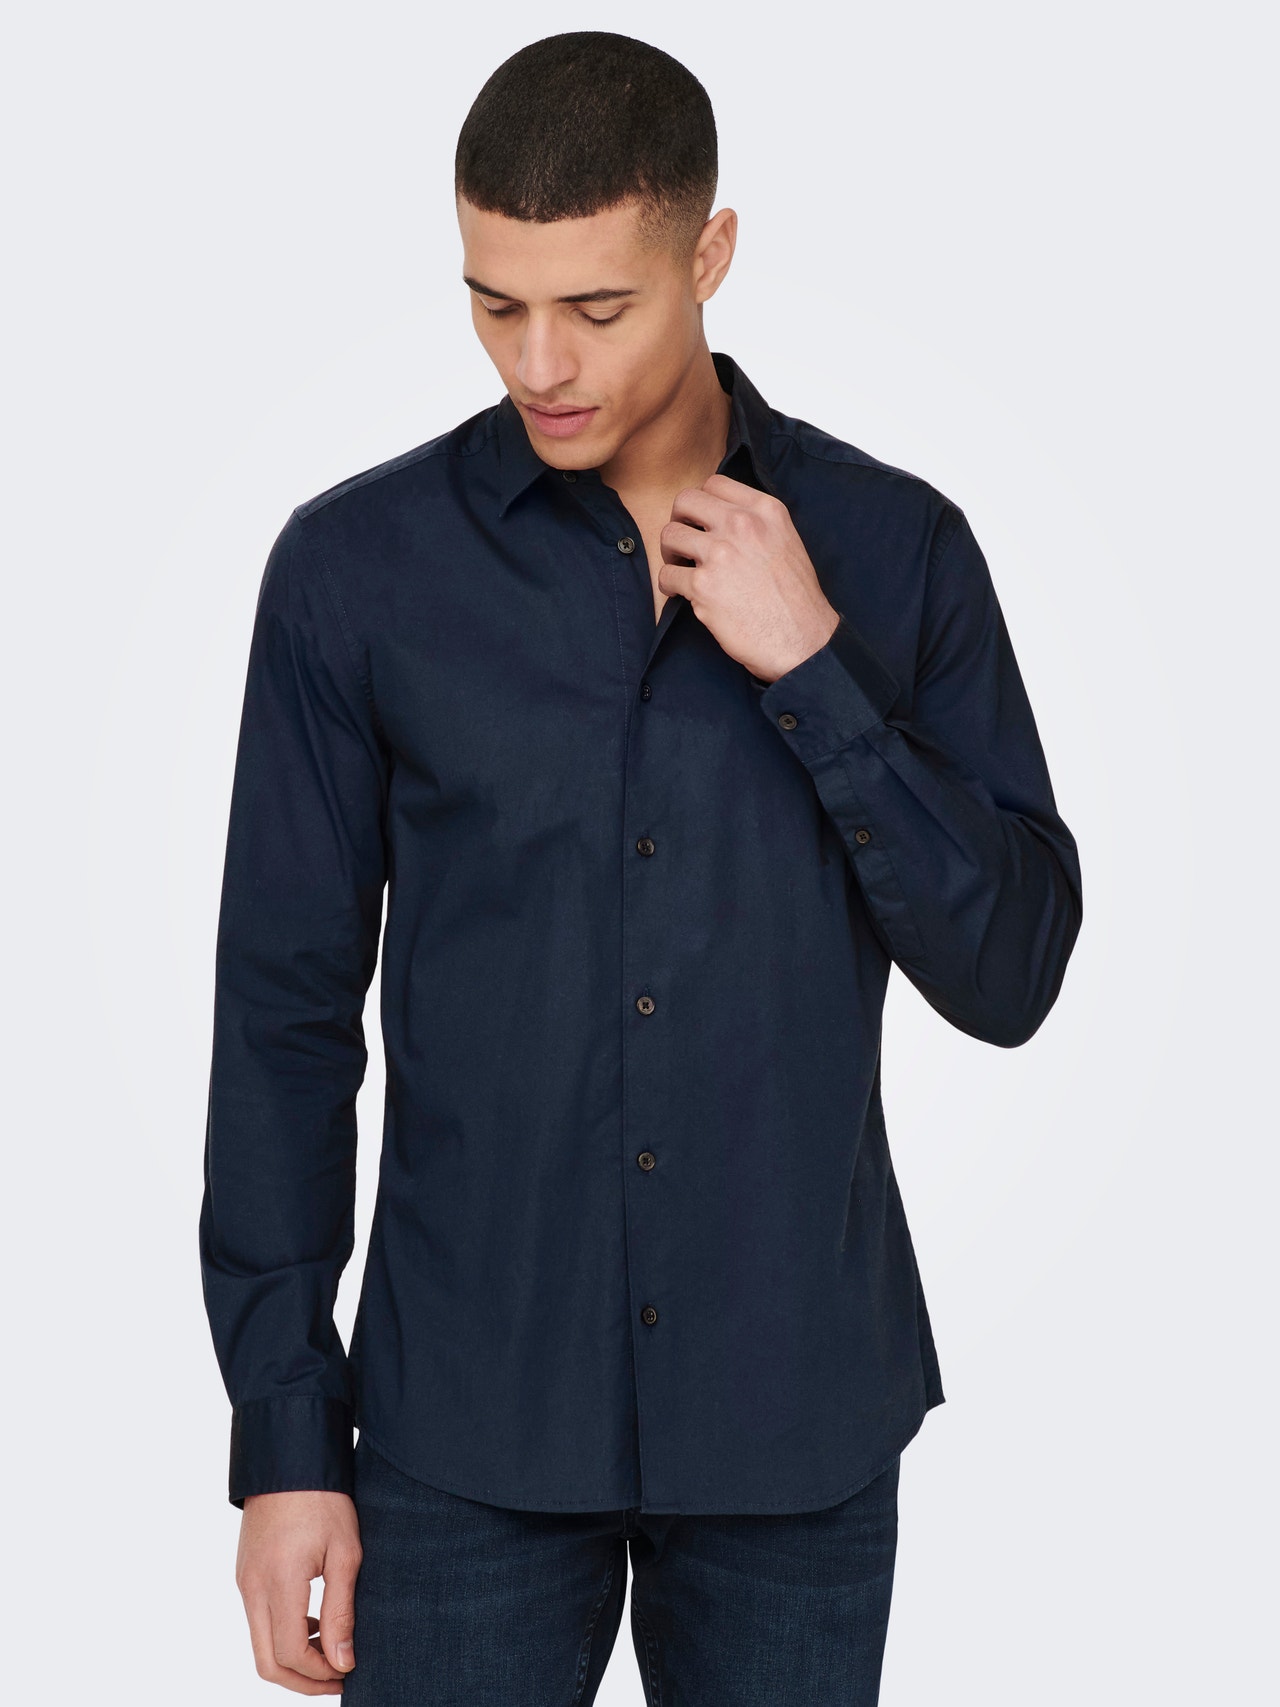 ONLY & SONS Solid color Slim Fit shirt -Dark Navy - 22026000